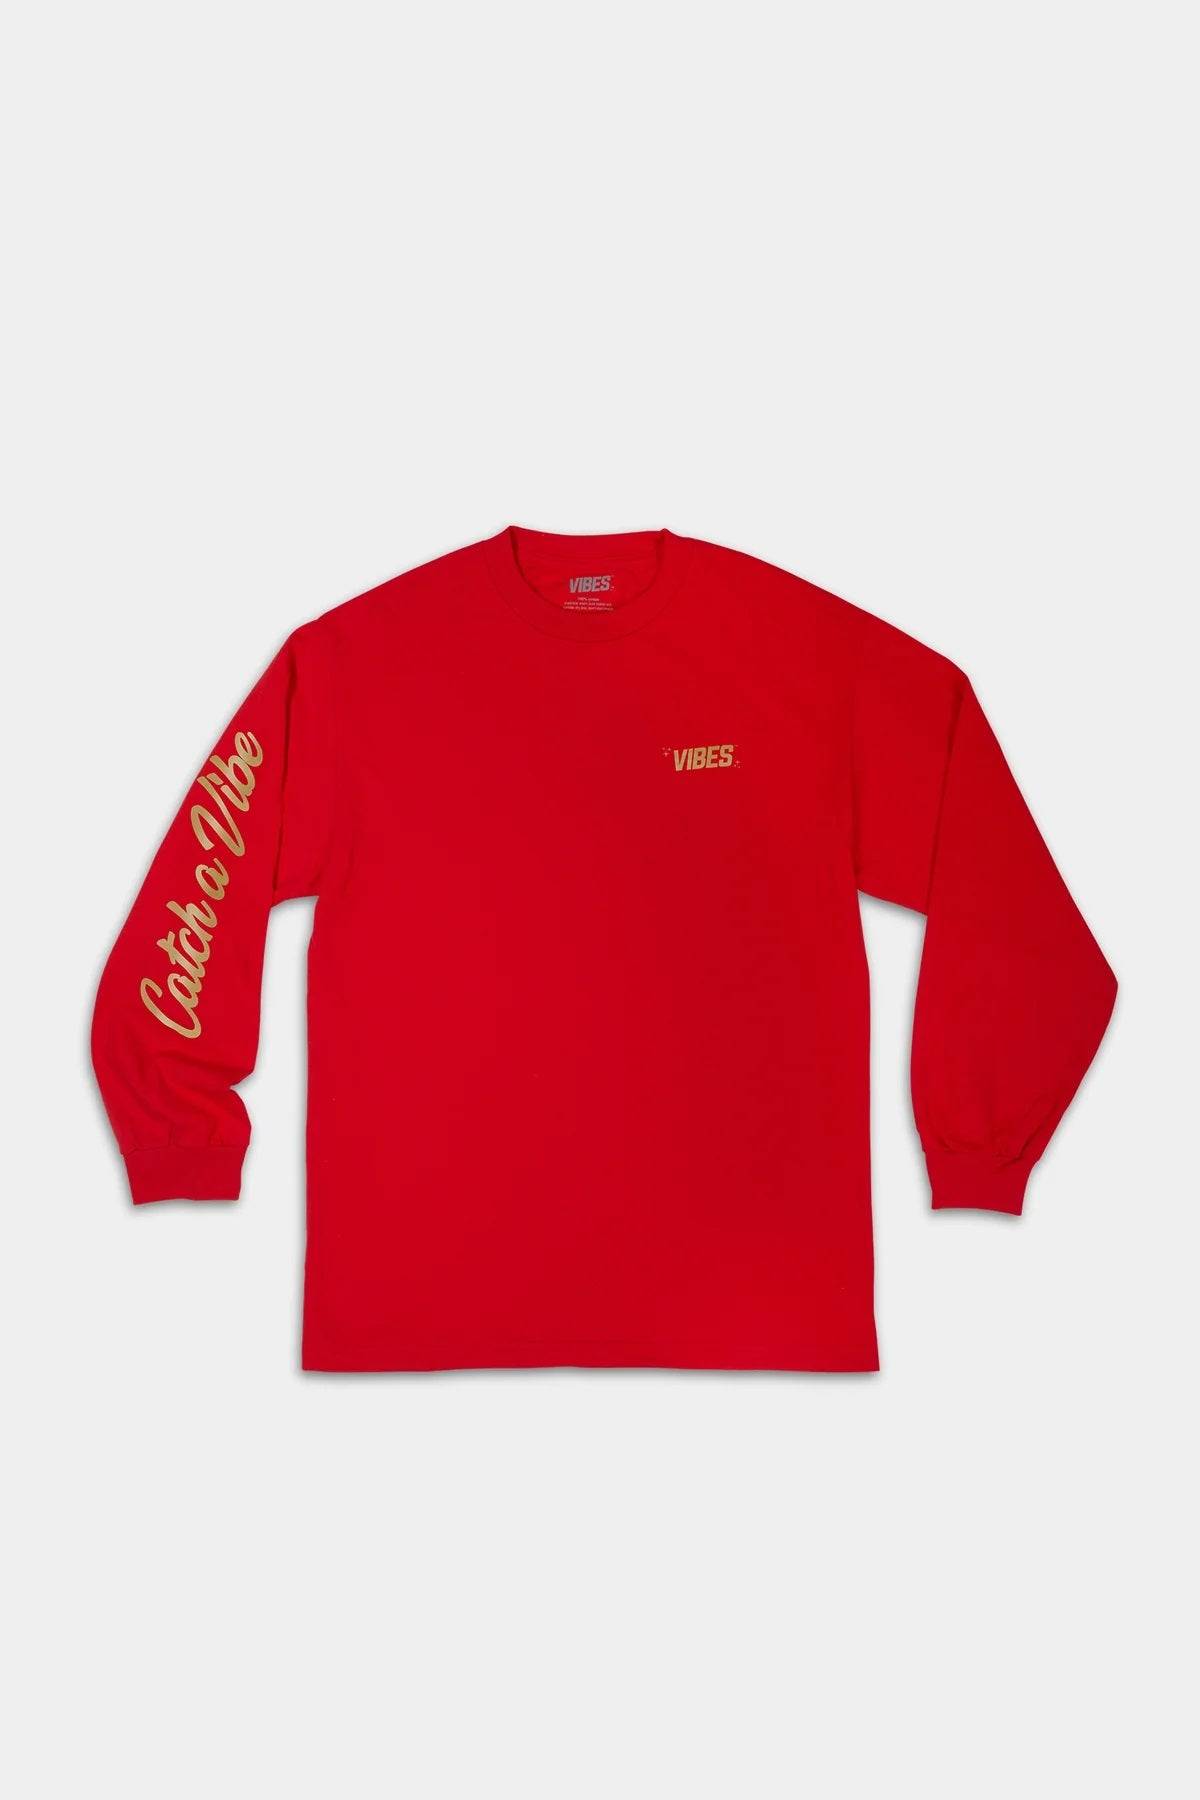 VIBES Red Catch A Vibe Long Sleeve Shirt 2X-Large